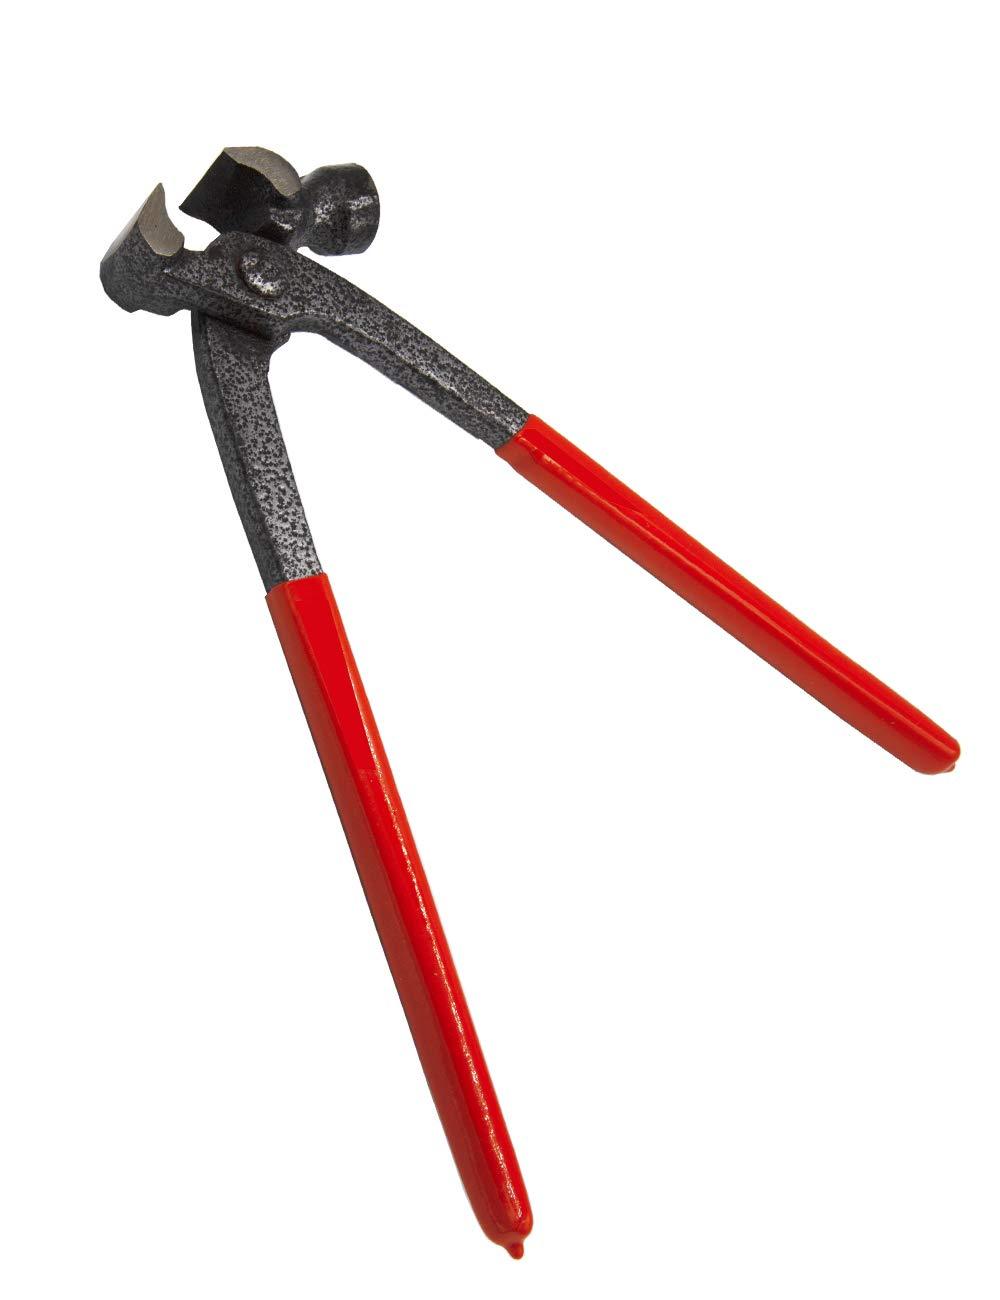 icicecream 2 in 1 Farrier Hoof Nipper with Hammer Multifunctional Farrier Tools 10in Goat Hoof Trimmer with Rubber Grips Red - PawsPlanet Australia